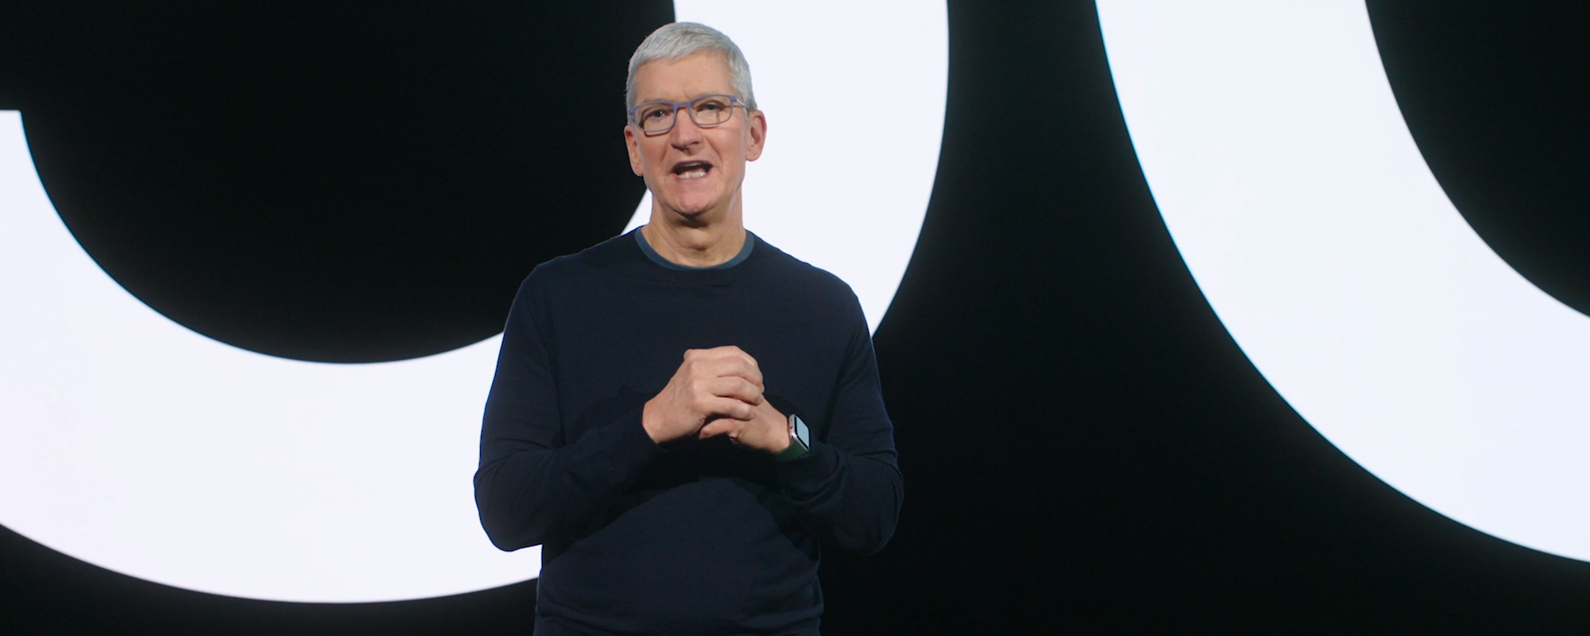 One More Thing How to Watch Apple's Mac Announcement on November 10